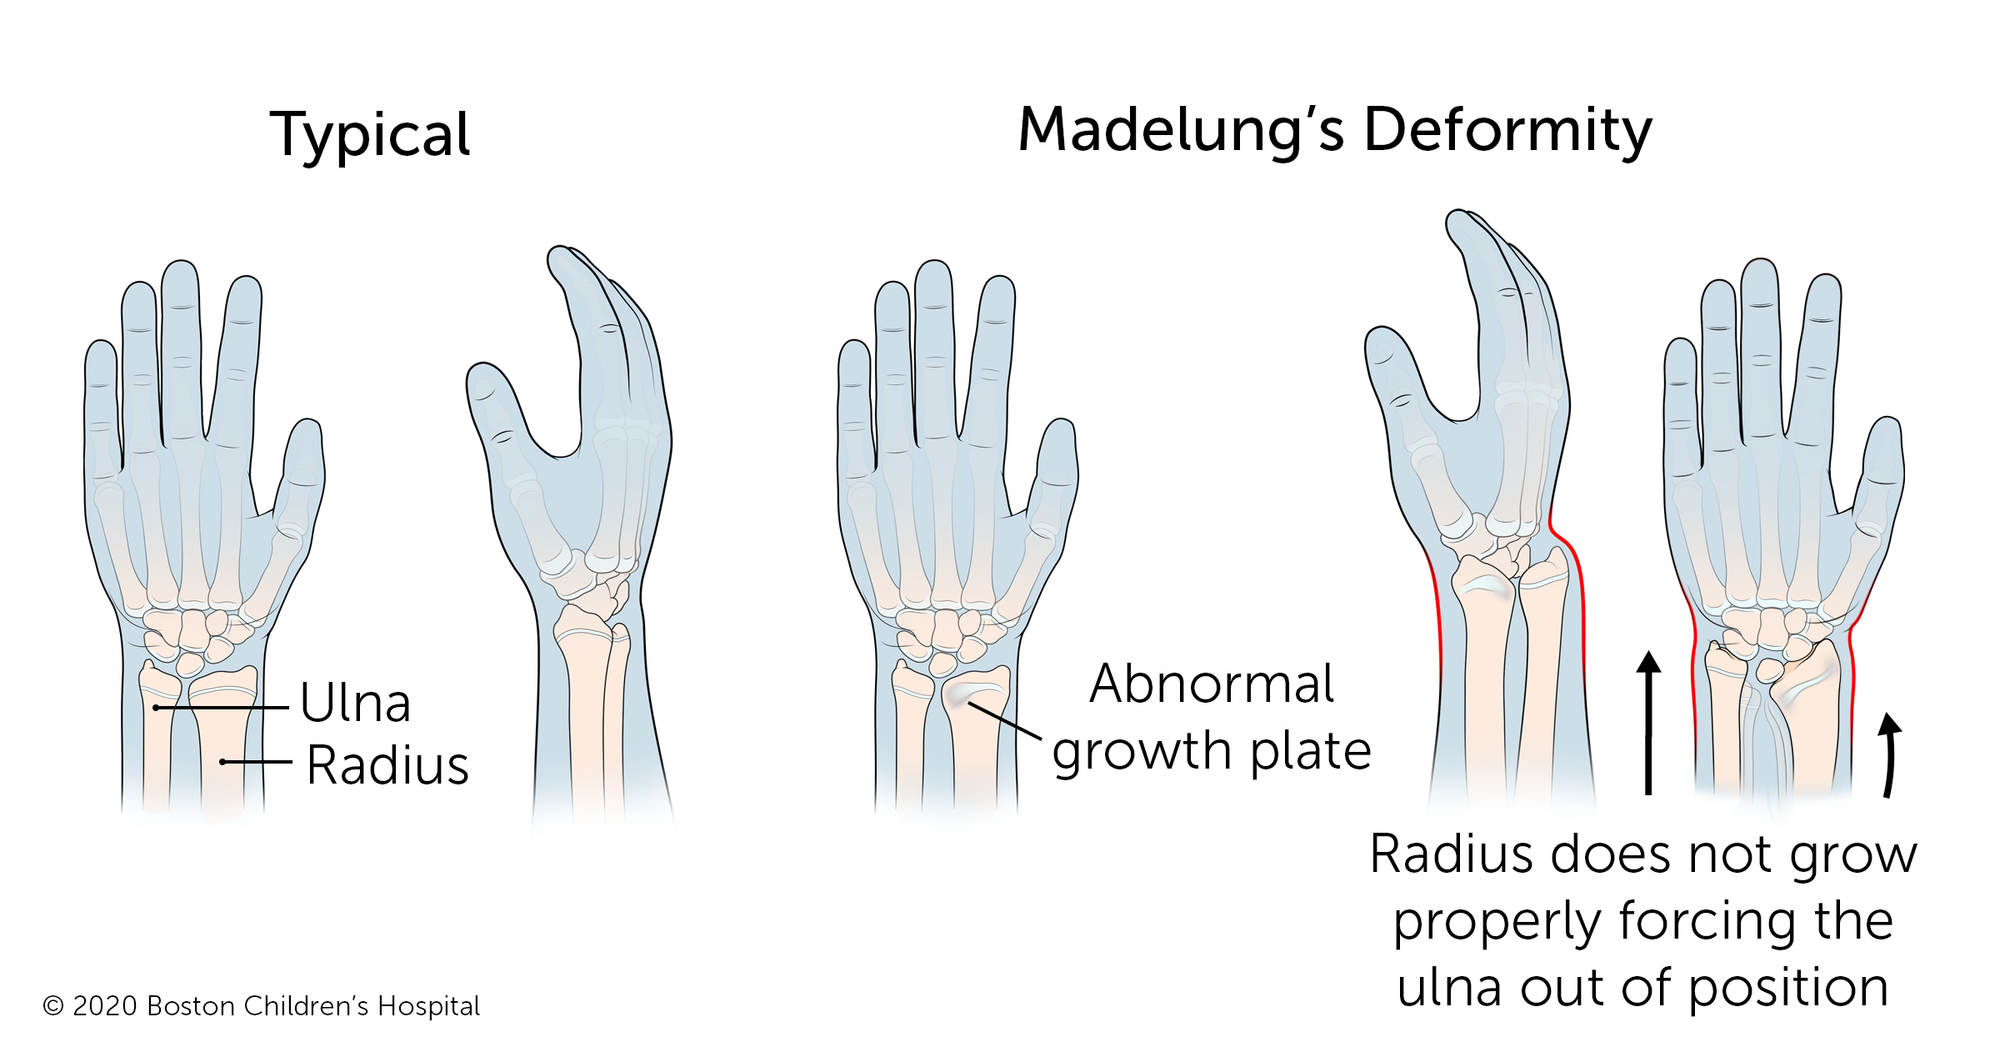 In a typical arm, the two long bones of the forearm (the ulna and the radius) connect to the wrist in a smooth line. With Madelung’s deformity, the radius grows abnormally, forcing the ulna out of position.